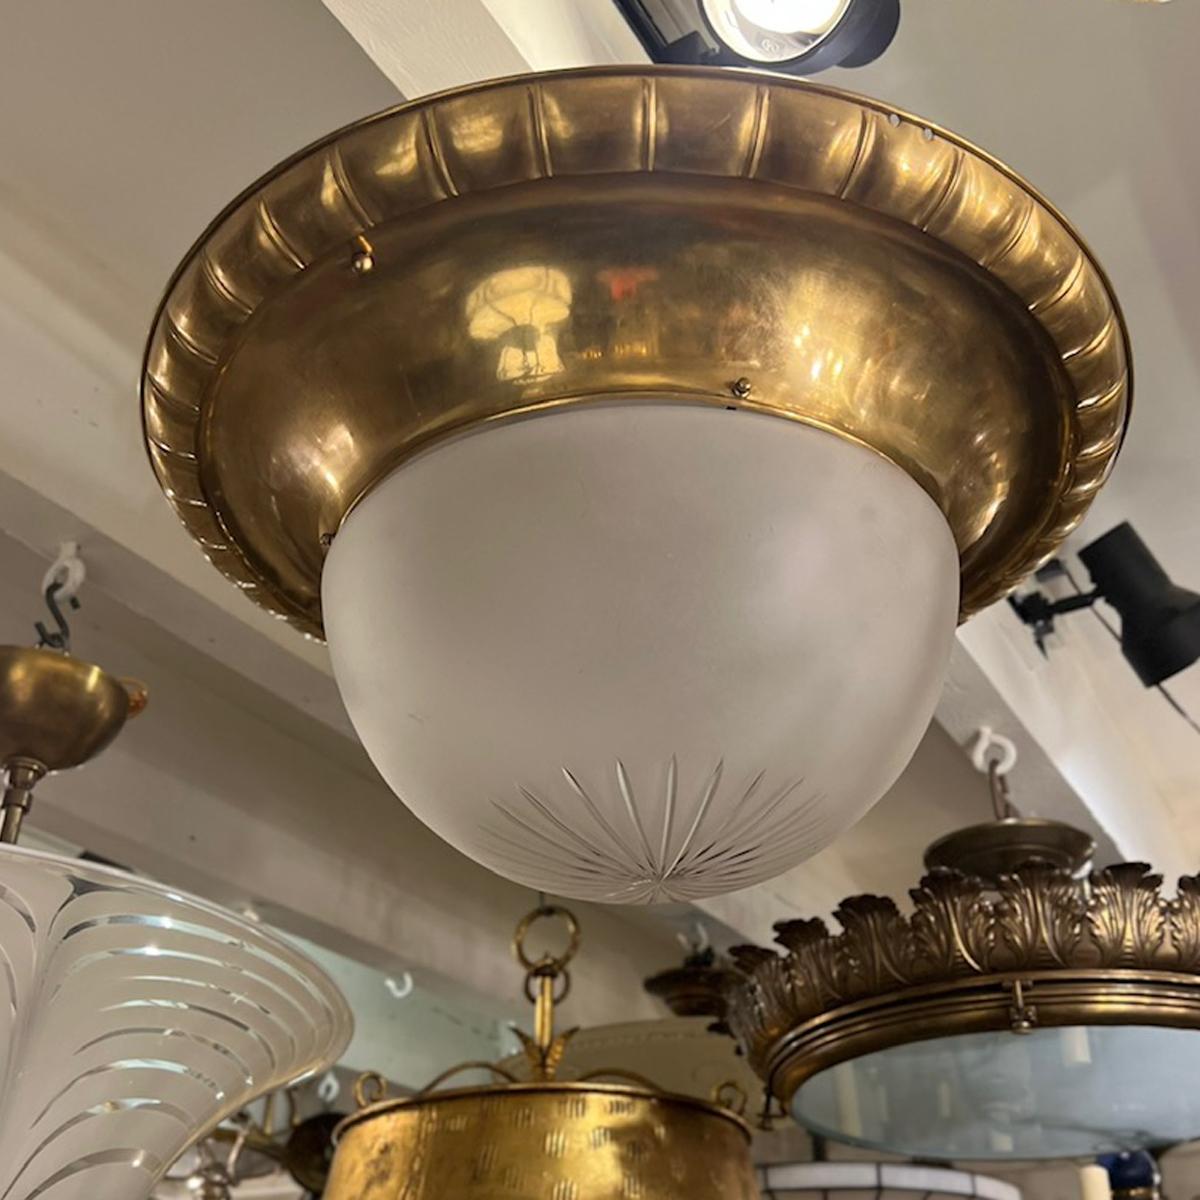 A circa 1920's English gilt bronze flush mounted light fixture with frosted glass inset.

Measurements:
Height: 10